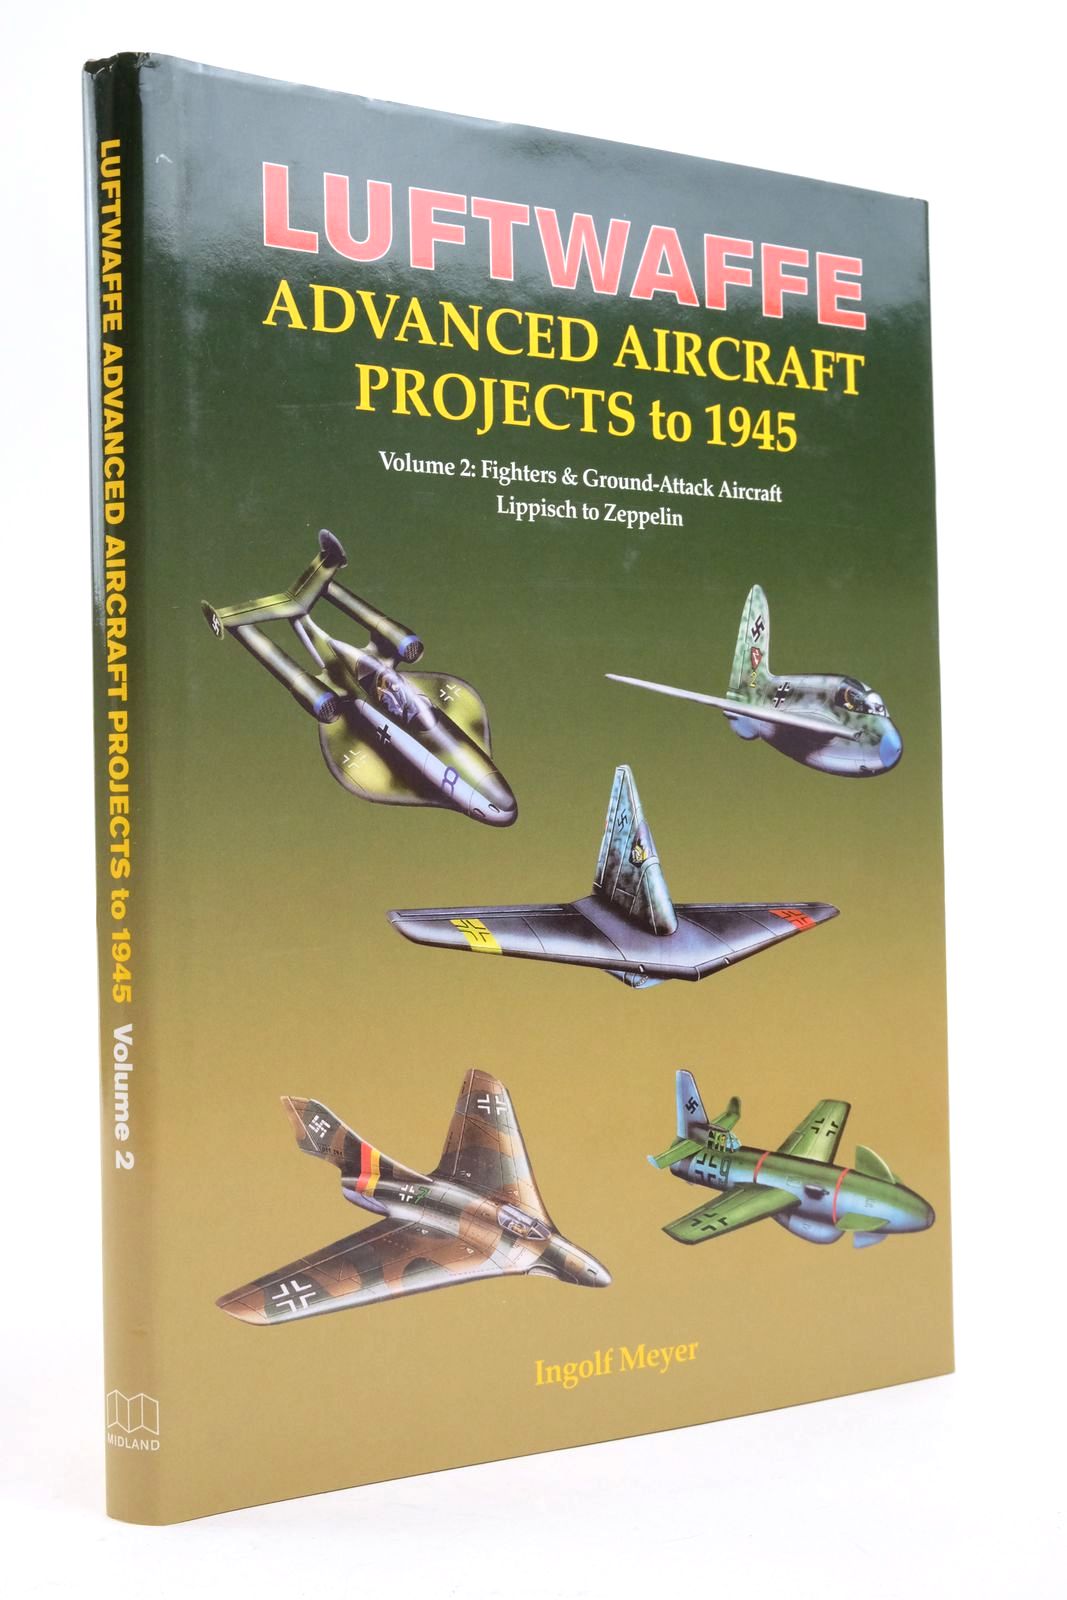 Photo of LUFTWAFFE ADVANCED AIRCRAFT PROJECTS TO 1945 VOLUME 2 written by Meyer, Ingolf published by Midland Publishing (STOCK CODE: 2138577)  for sale by Stella & Rose's Books